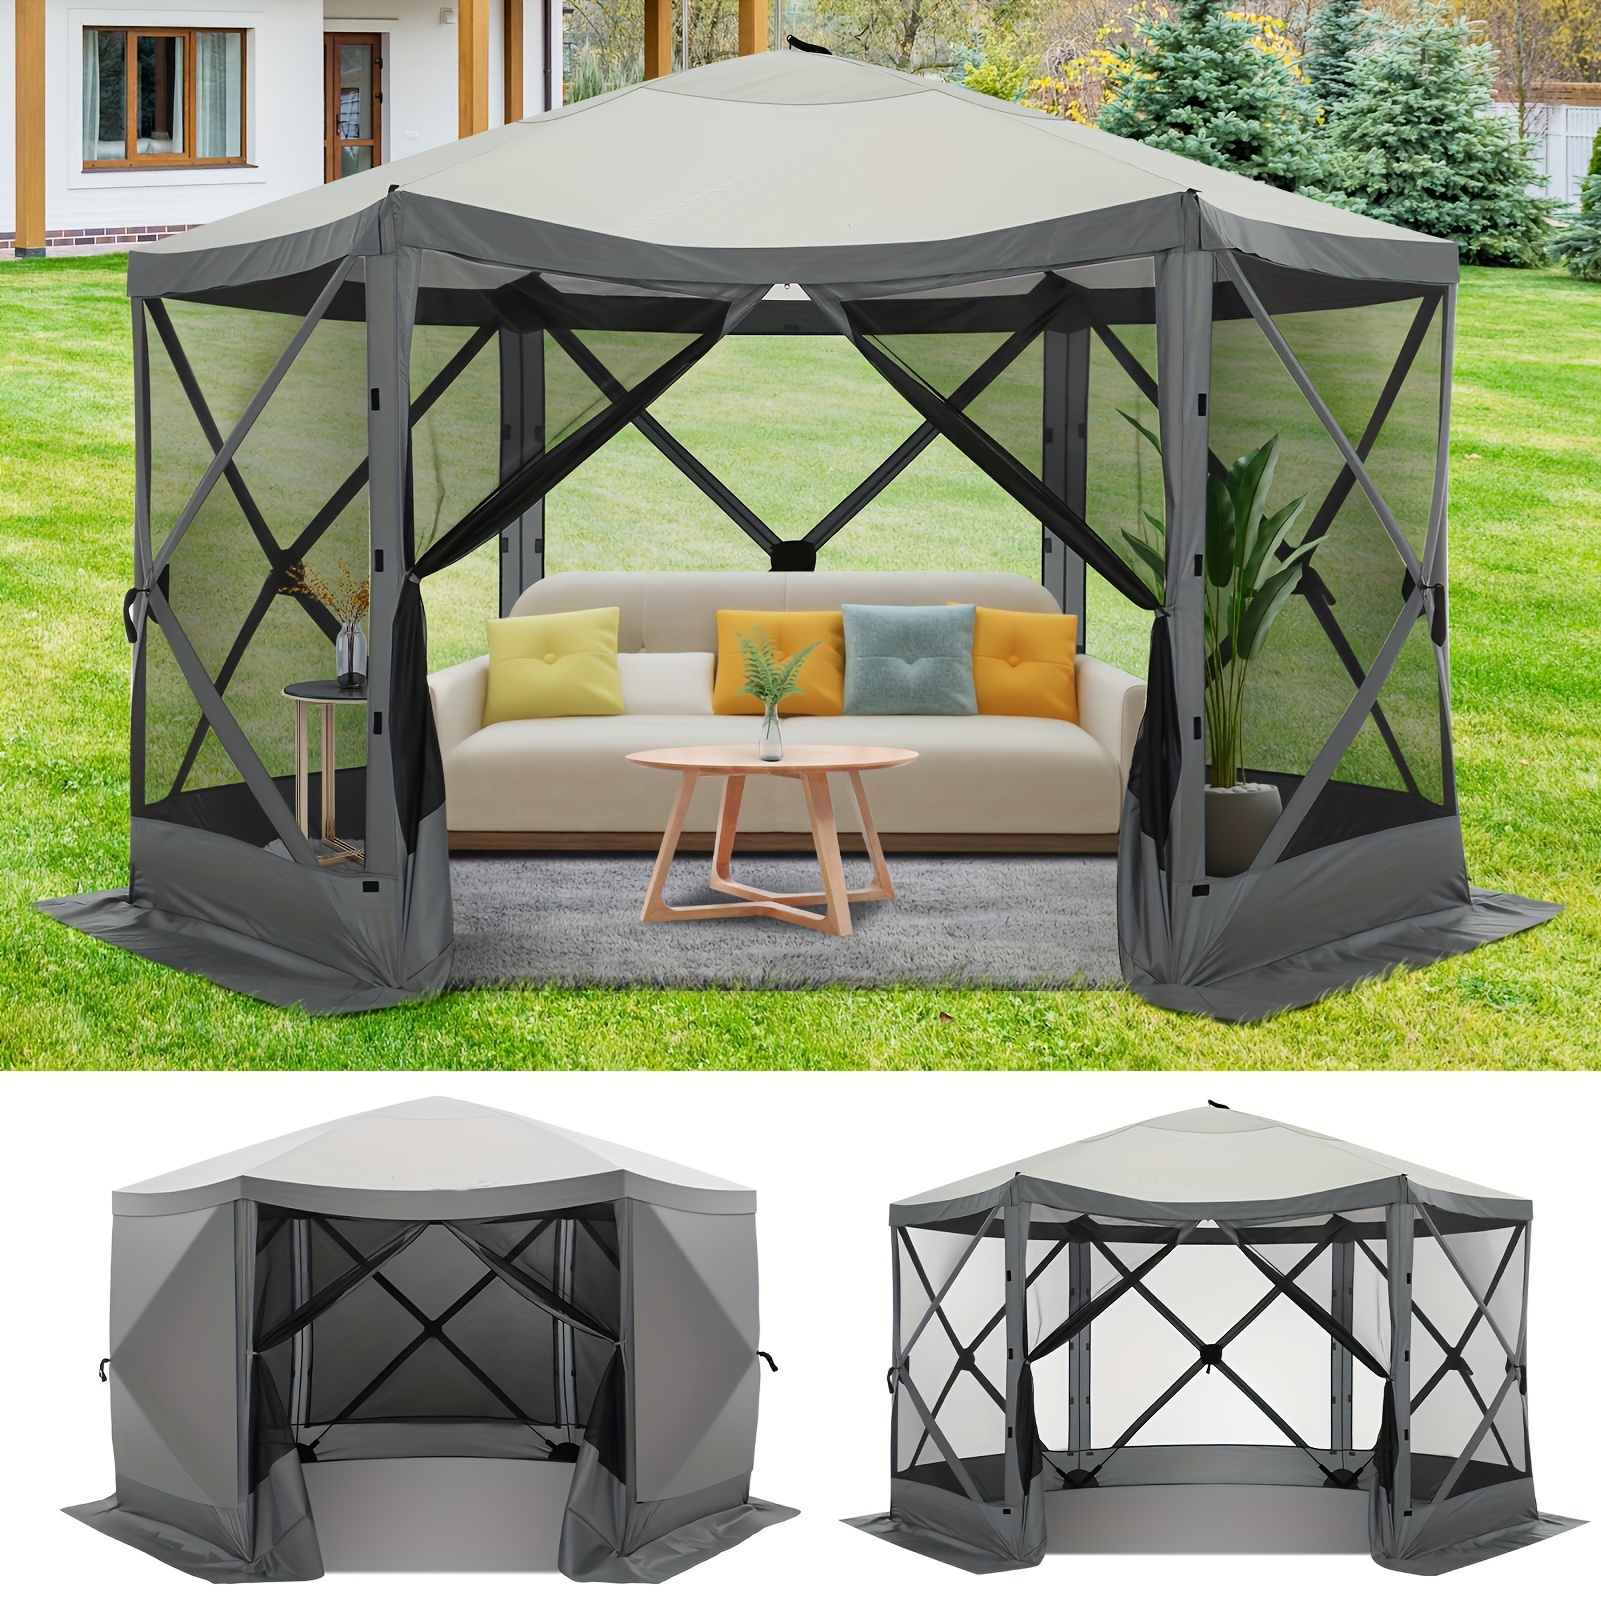 

12x12ft Pop Up Gazebo Screen Tent Canopy For Camping Portable Screen House With Netting & Carry Bag For 8-10 Person